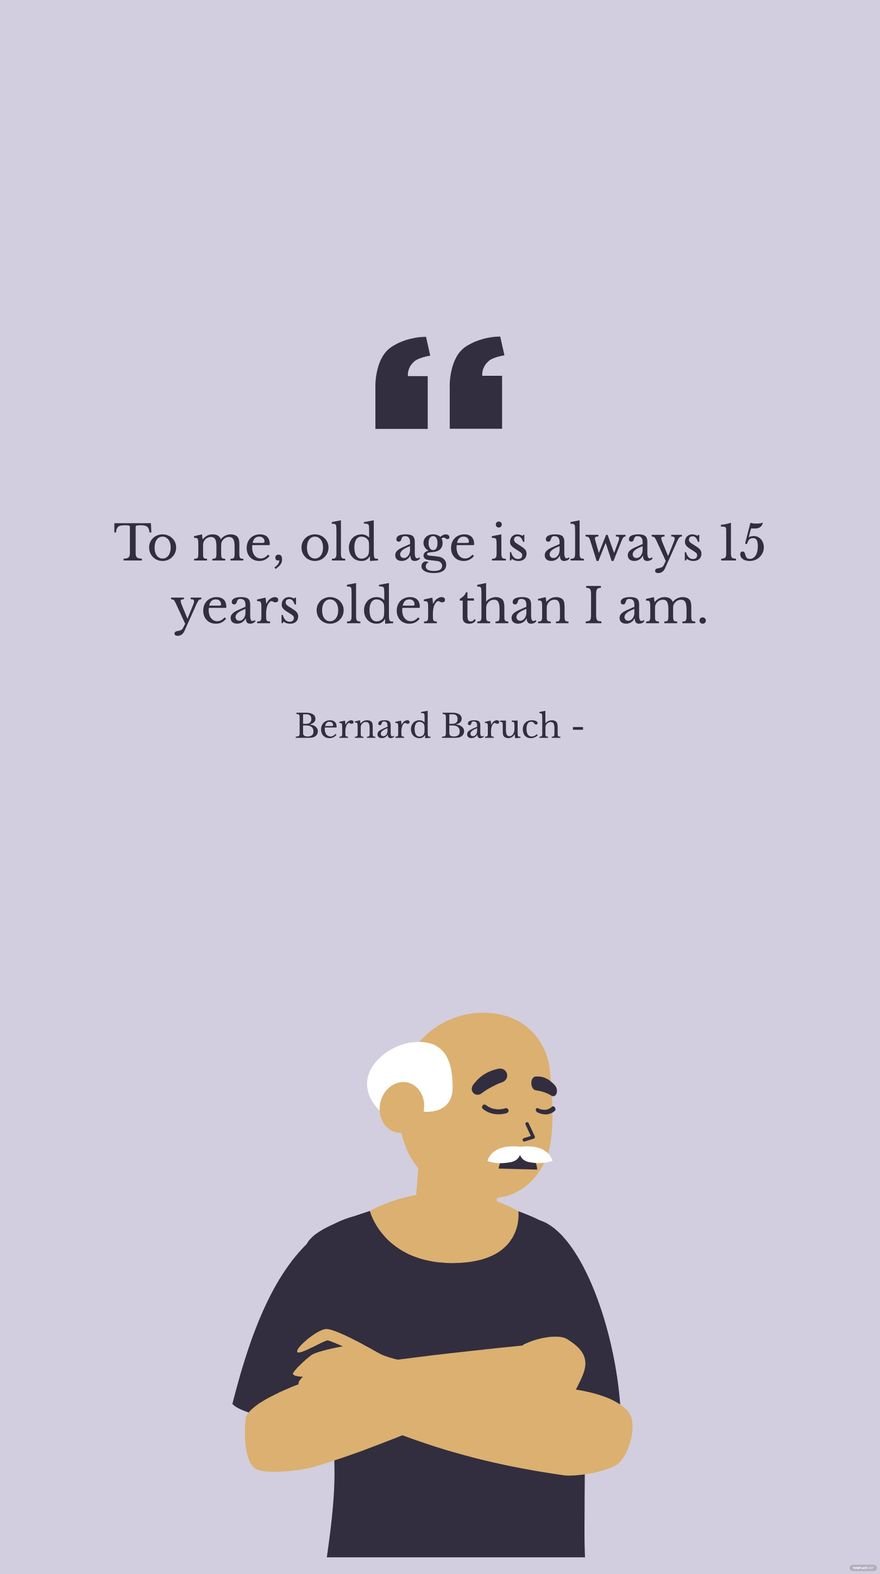 Bernard Baruch - To me, old age is always 15 years older than I am.